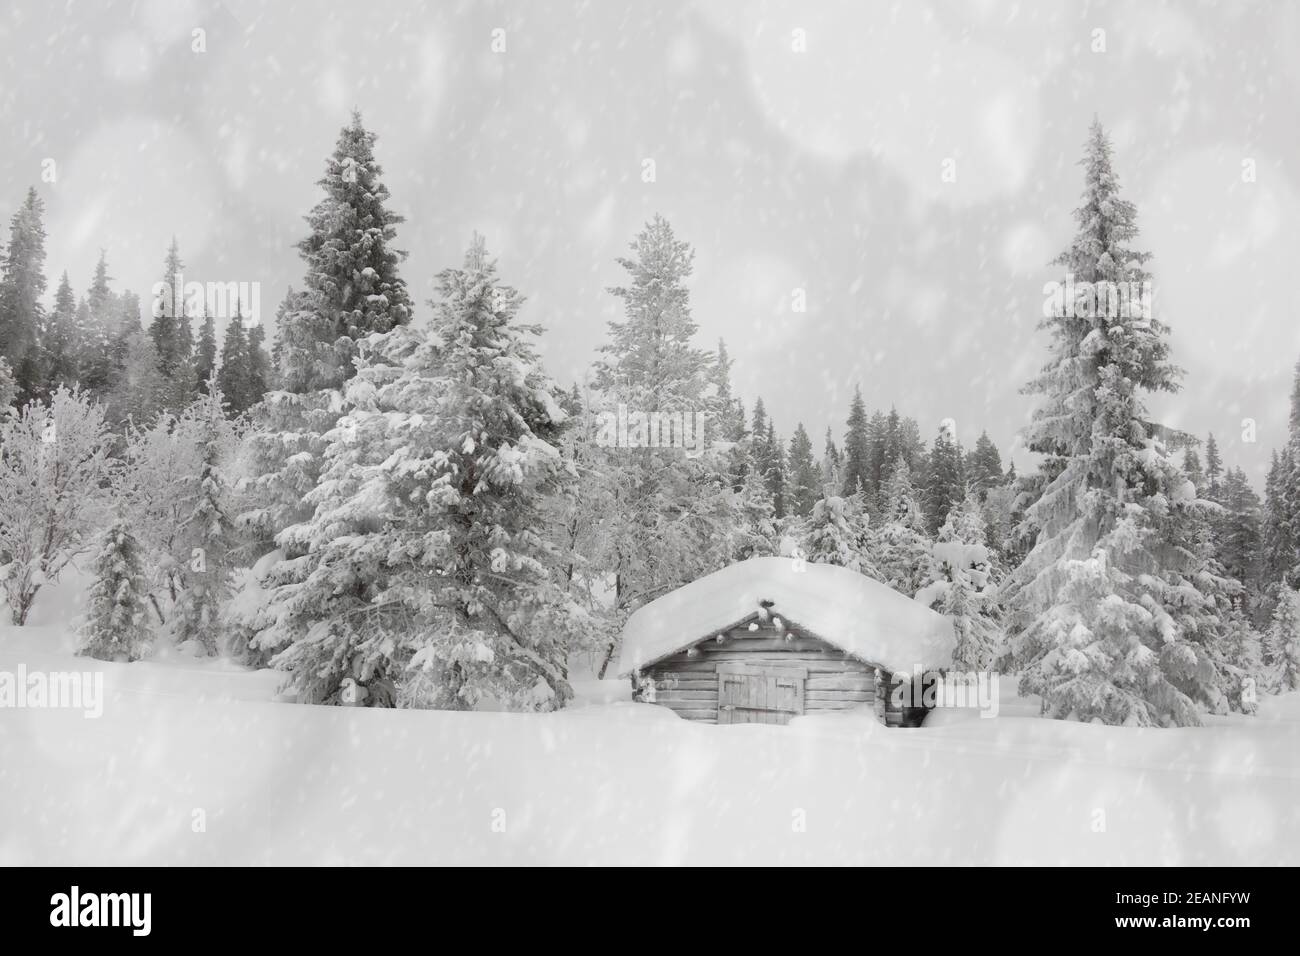 Snowflakes falling on traditional wooden hut in the snow capped forest, Lapland, Finland, Europe Stock Photo